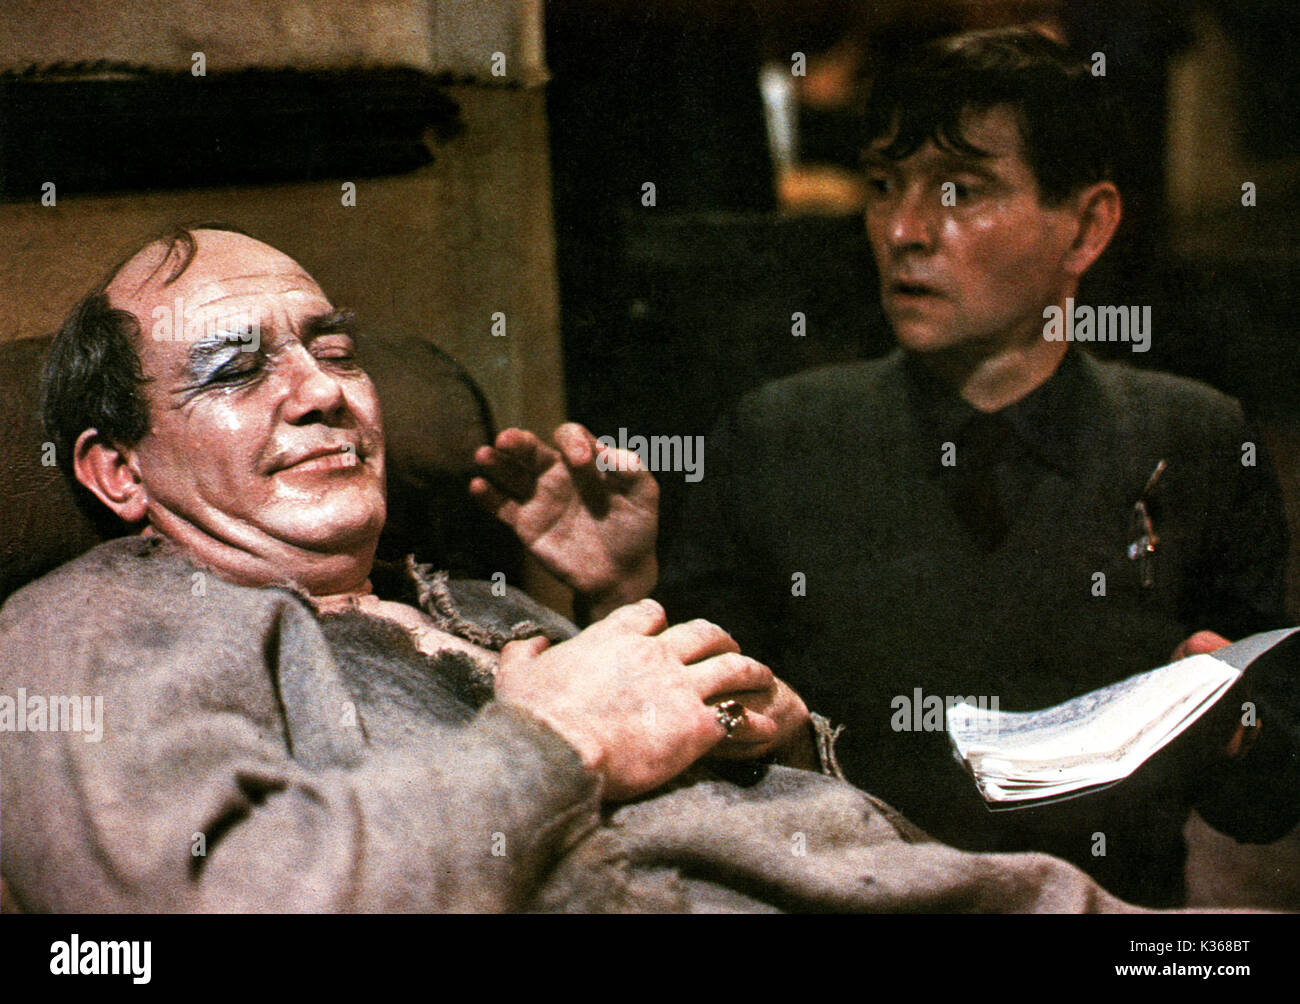 La commode Albert Finney, TOM COURTENAY Date : 1983 Banque D'Images